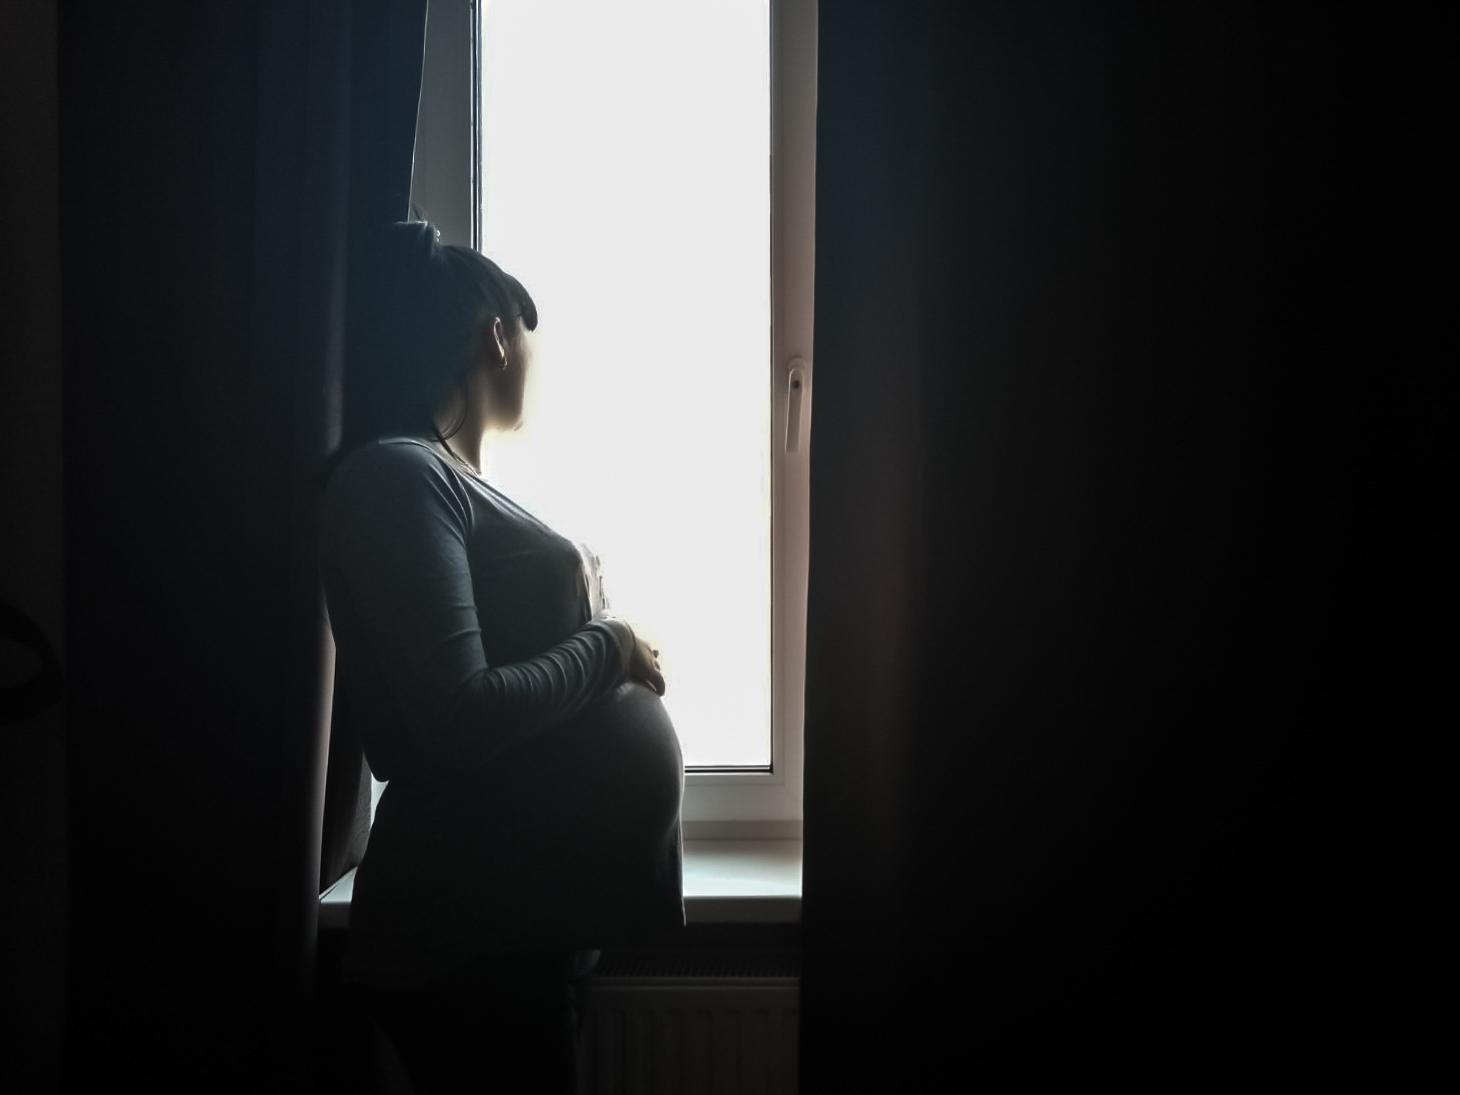 A heavily pregnant surrogate mother looks out of the window of her home.